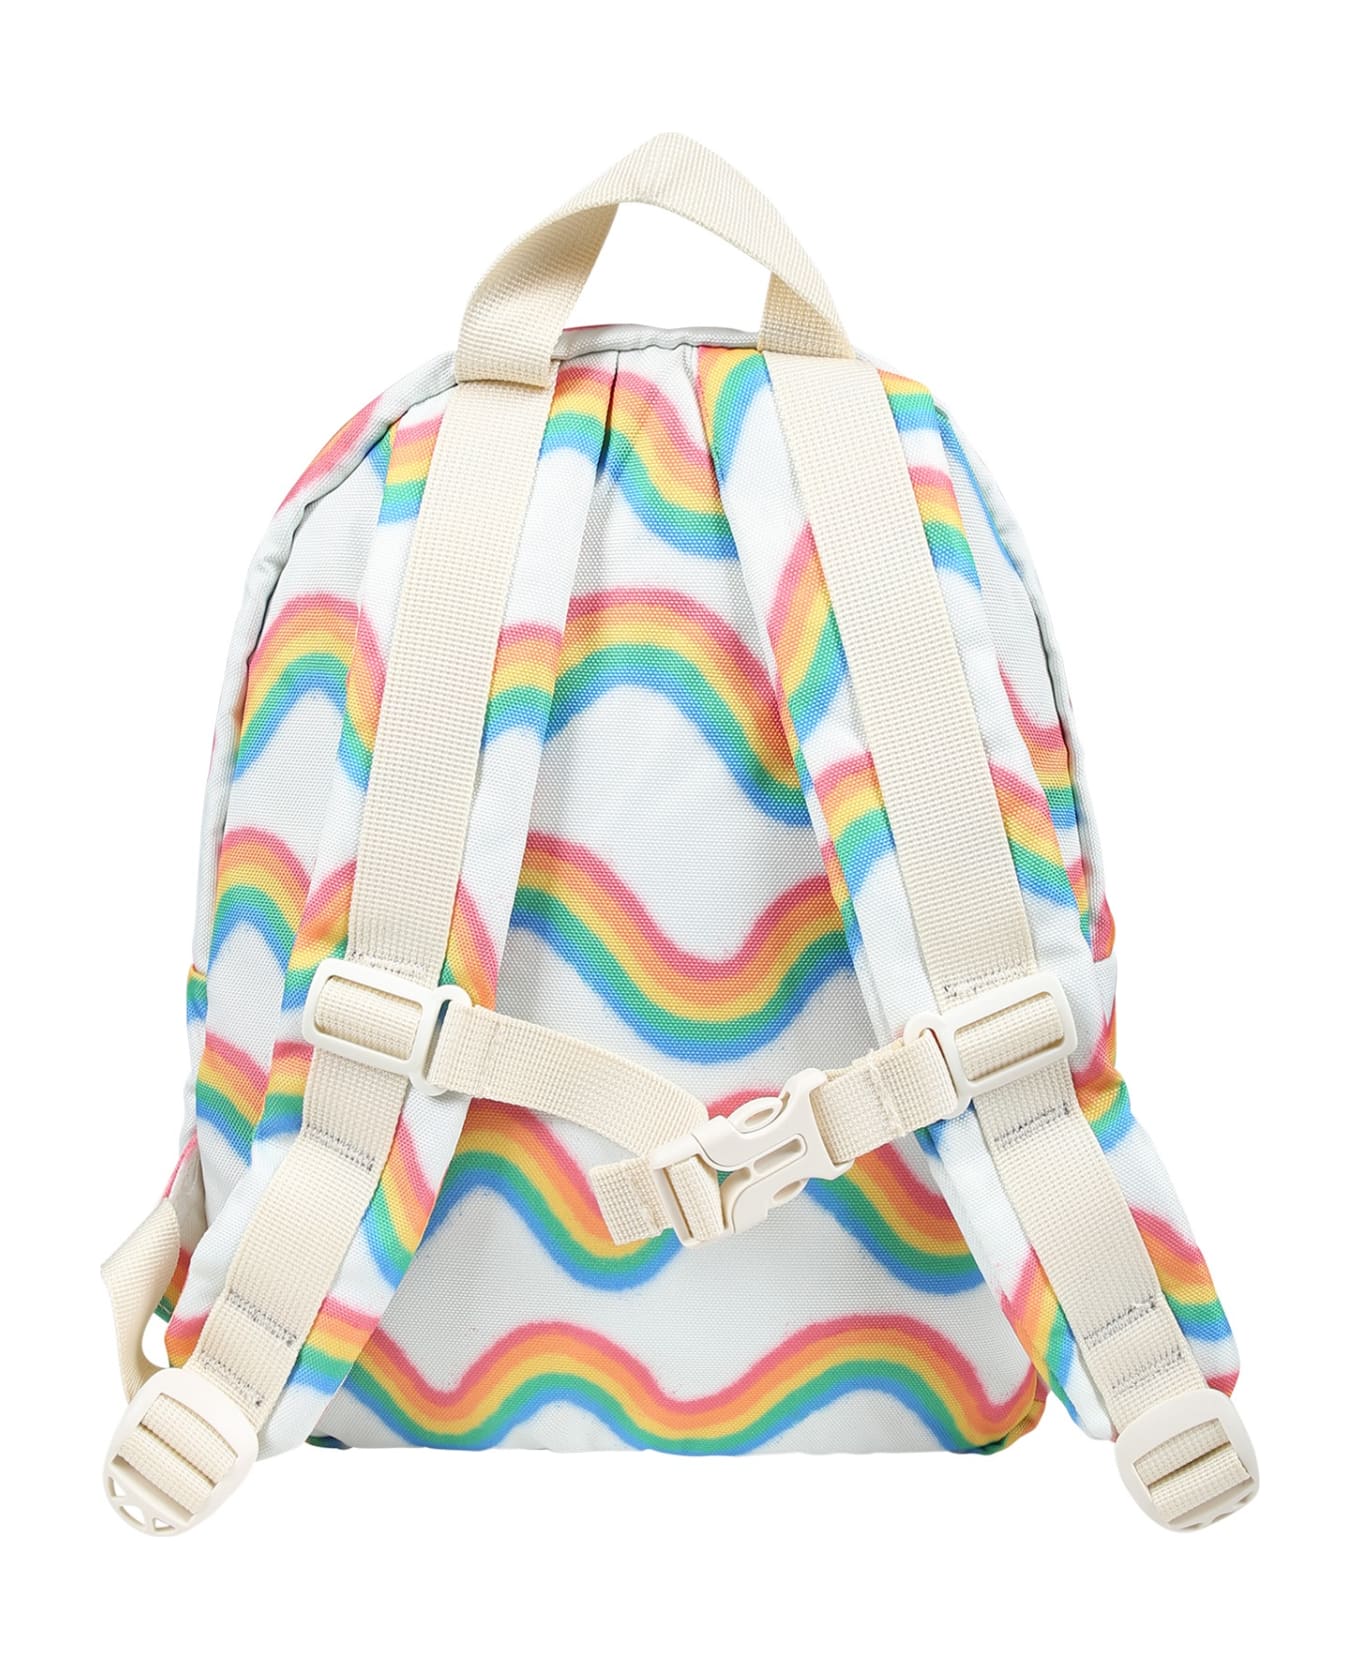 Molo White Backpack For Kids With Rainbow Print - Multicolor